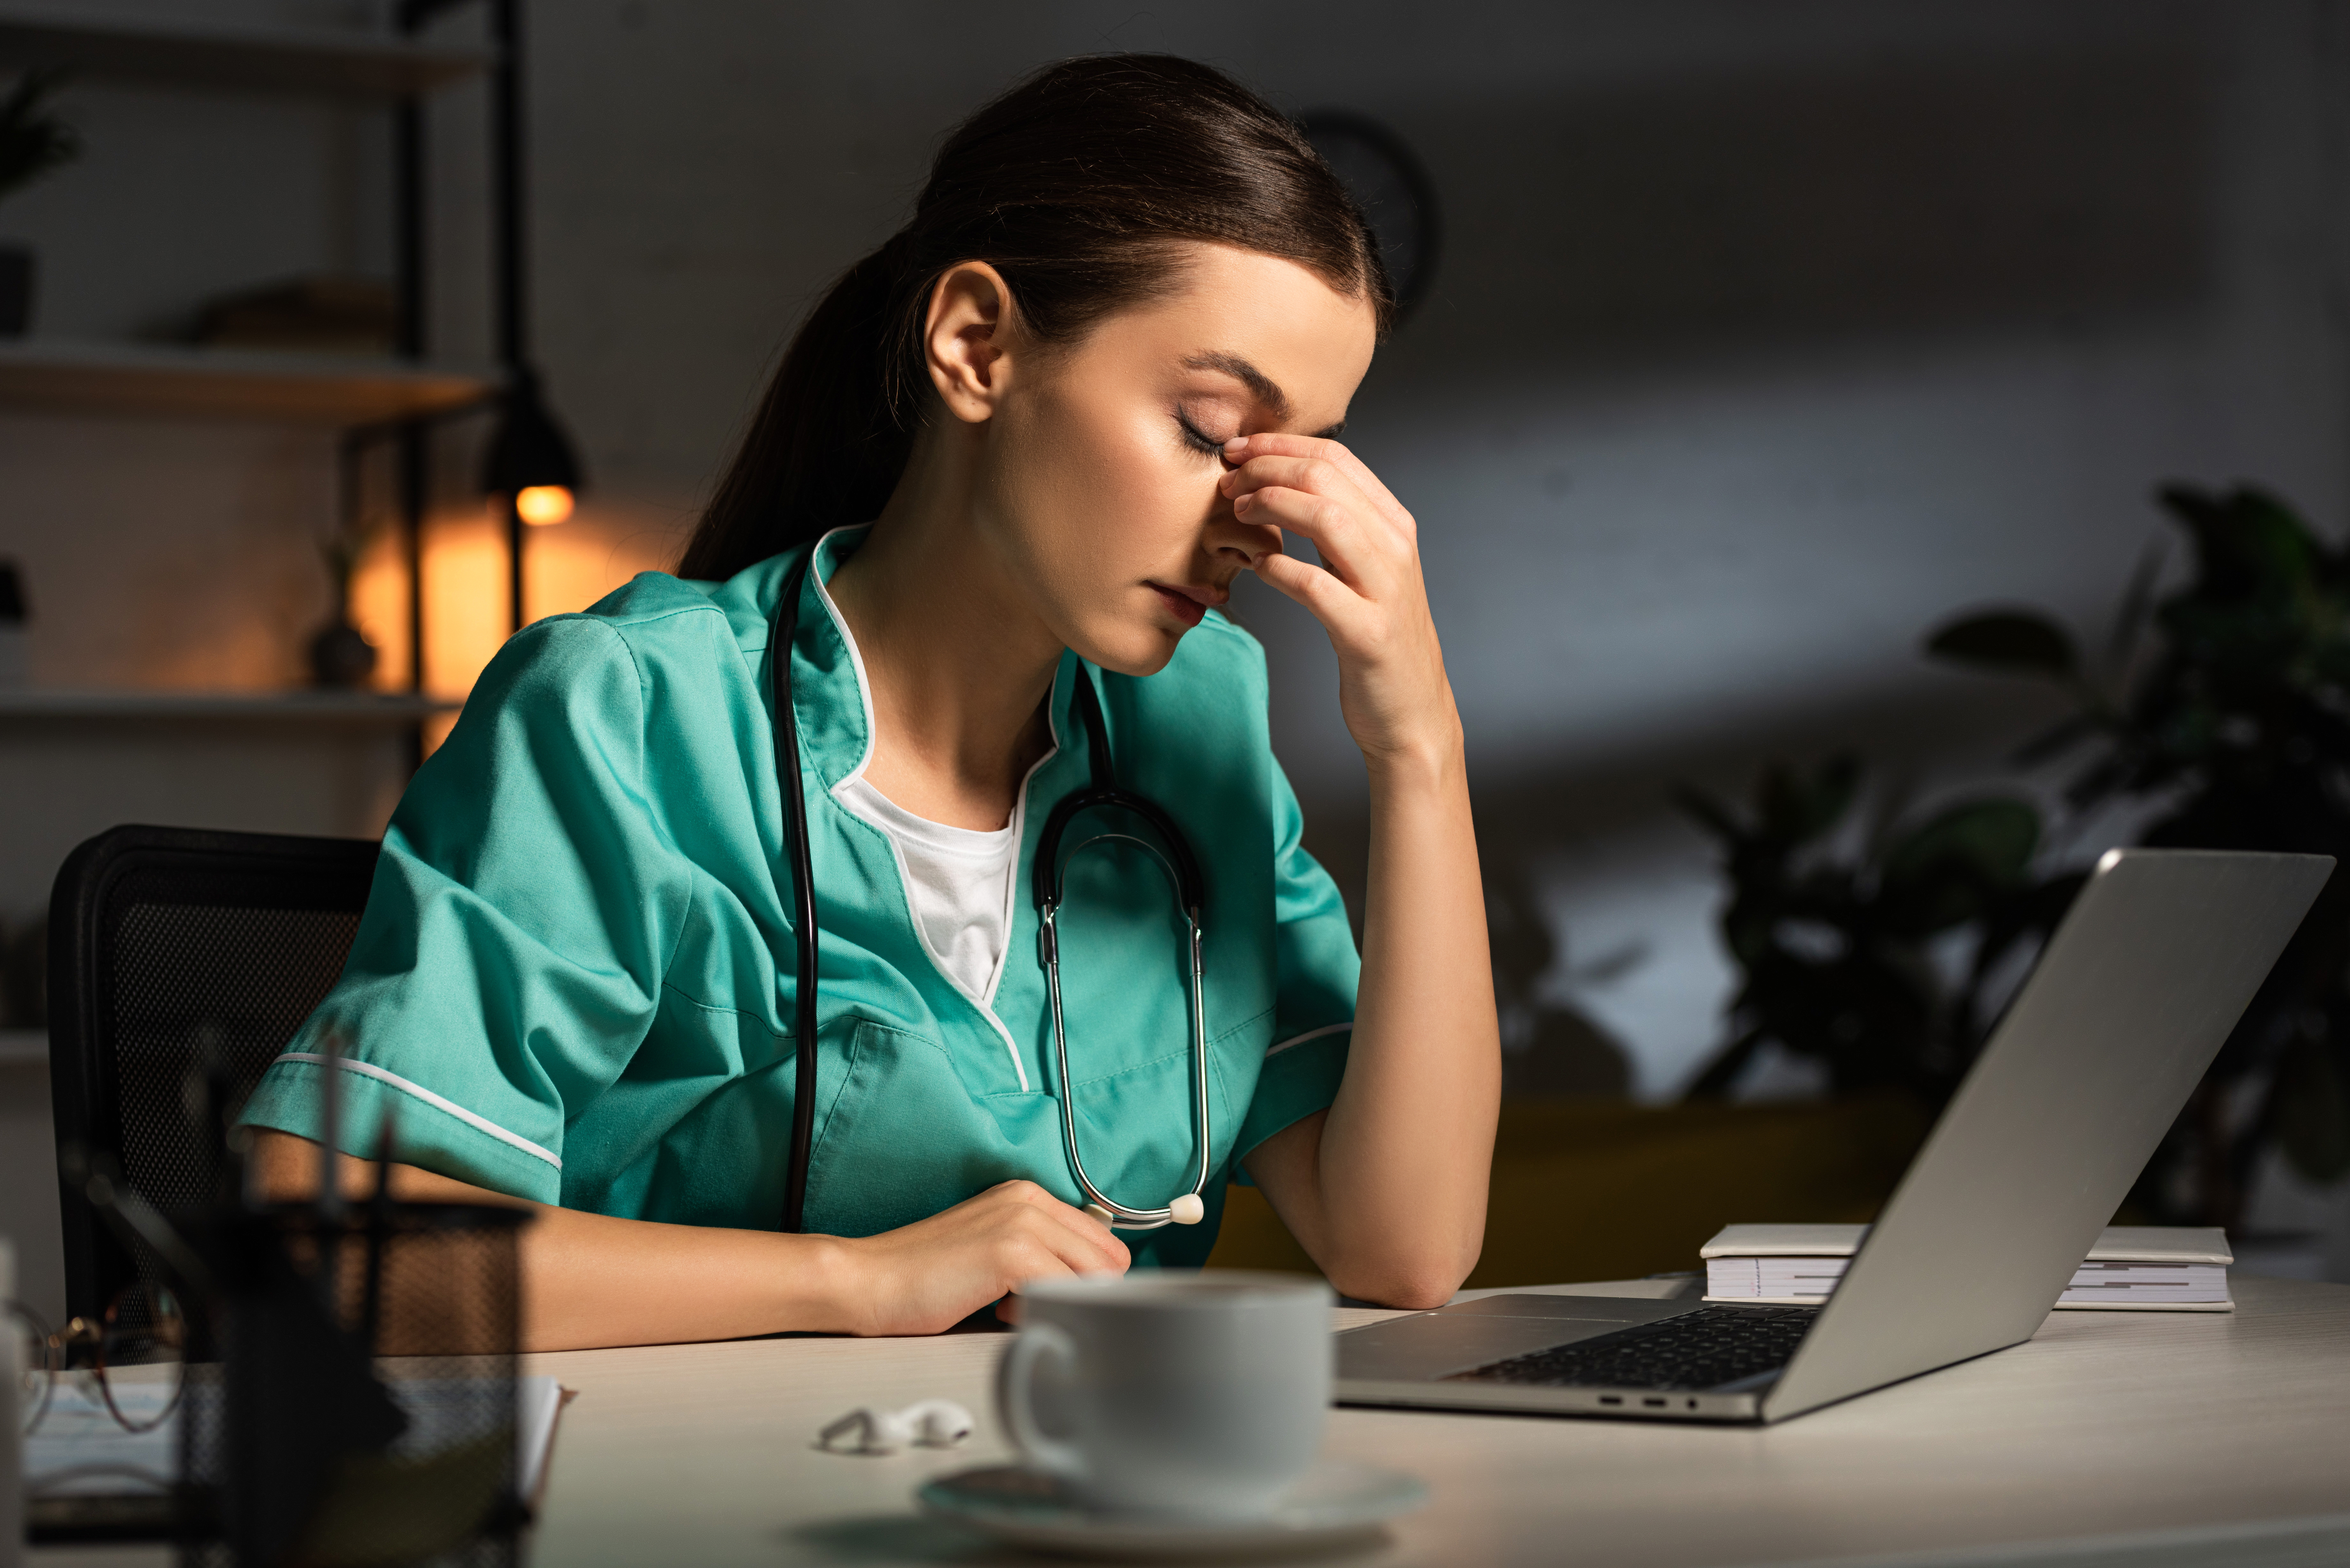 Tired nurse in uniform sitting at table during night shift | Source: Shutterstock.com